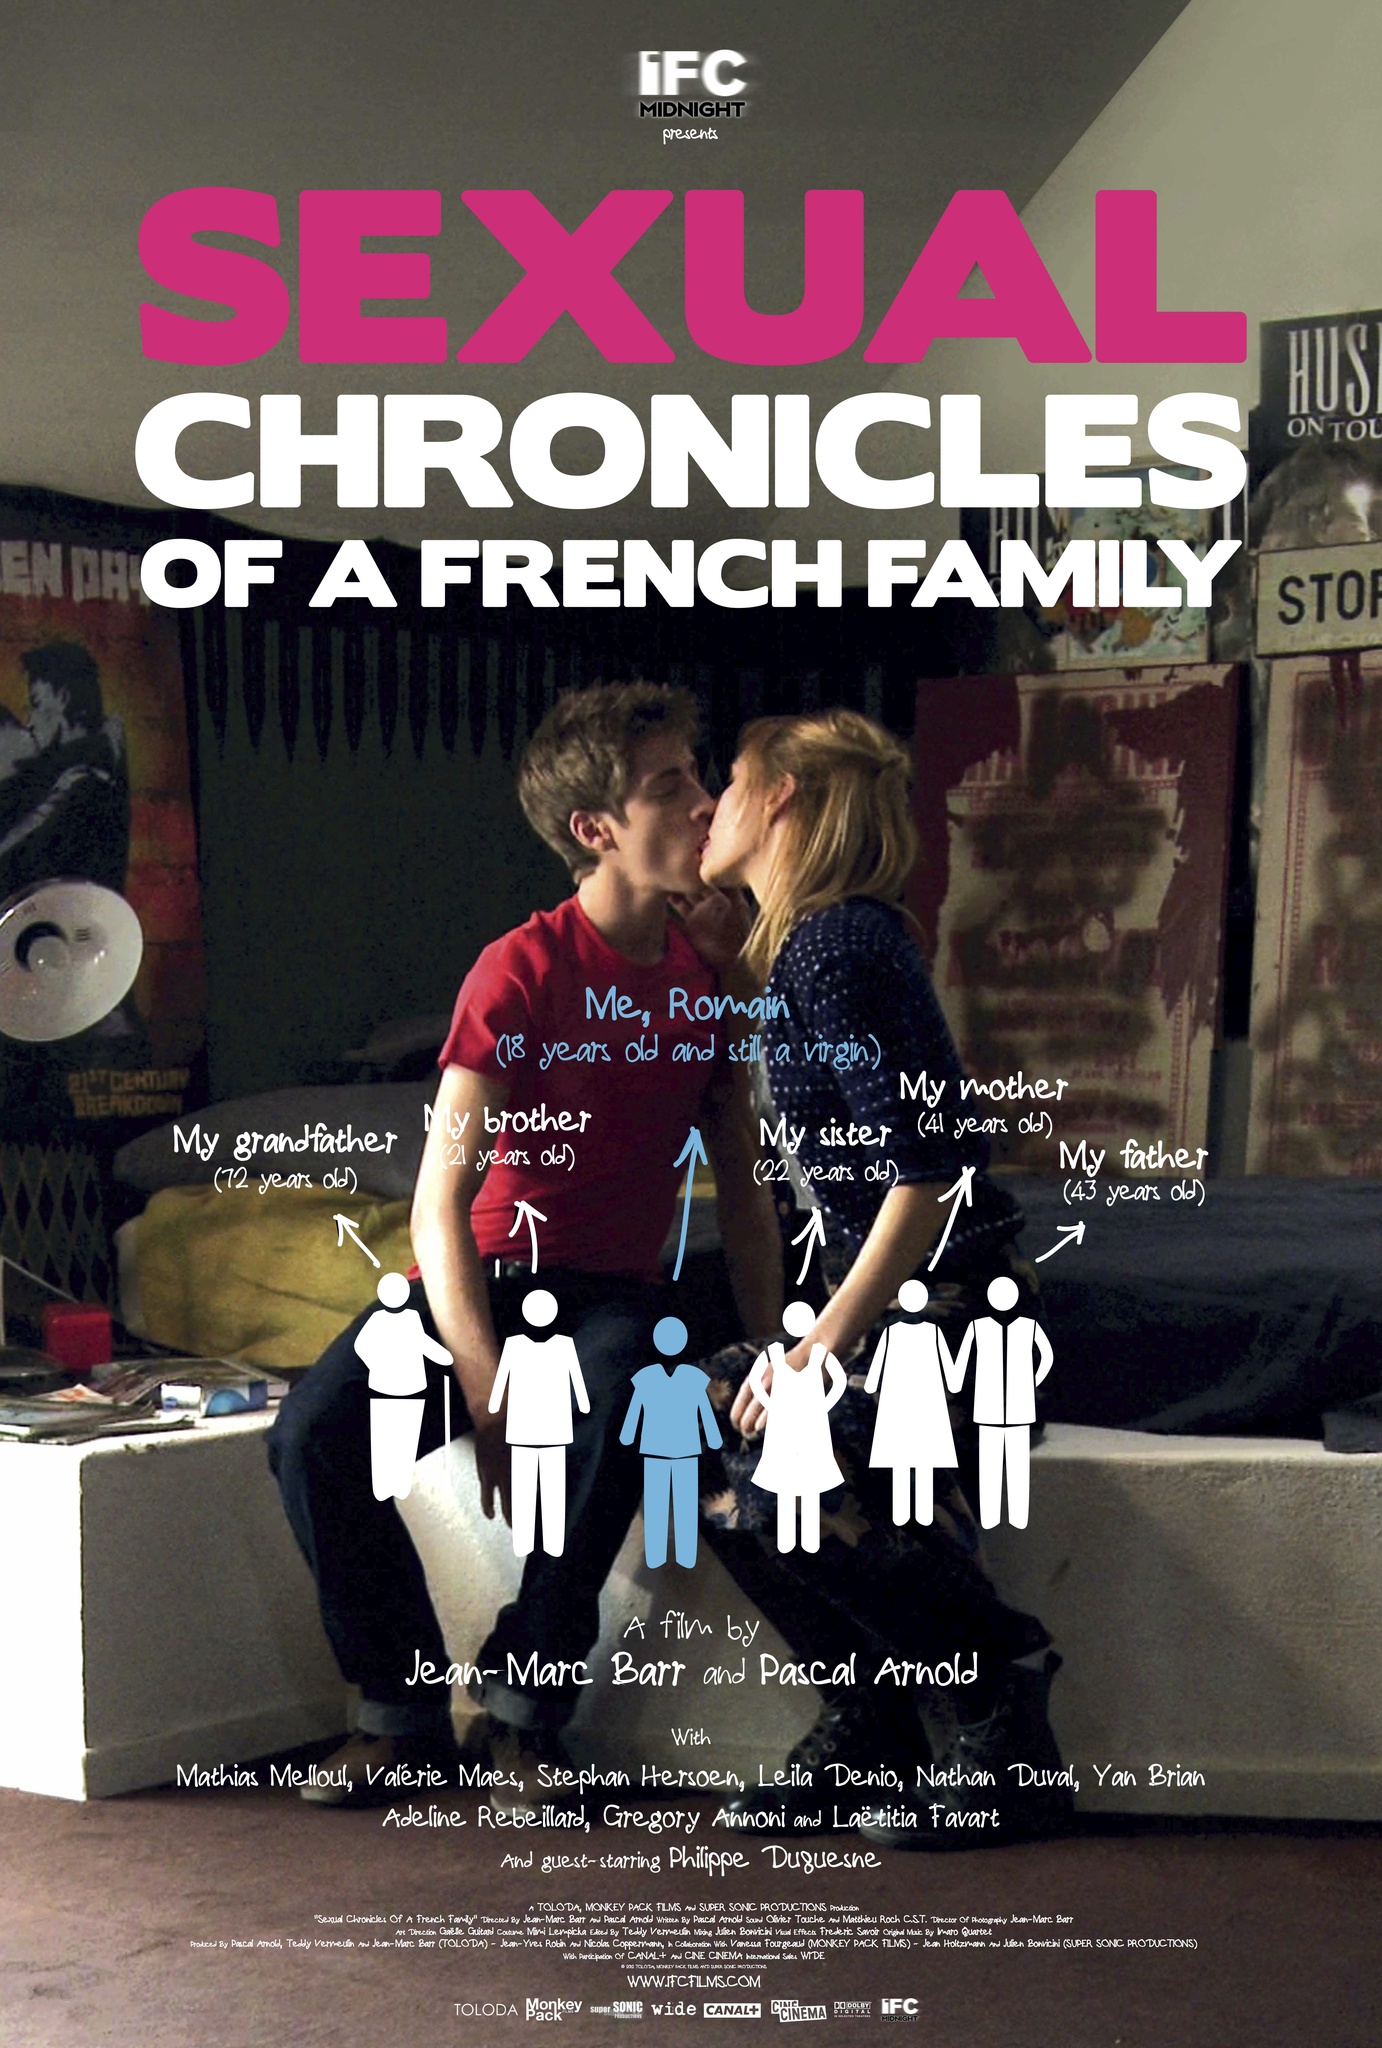 Sexual Chronicles of a French Family cenas de nudez